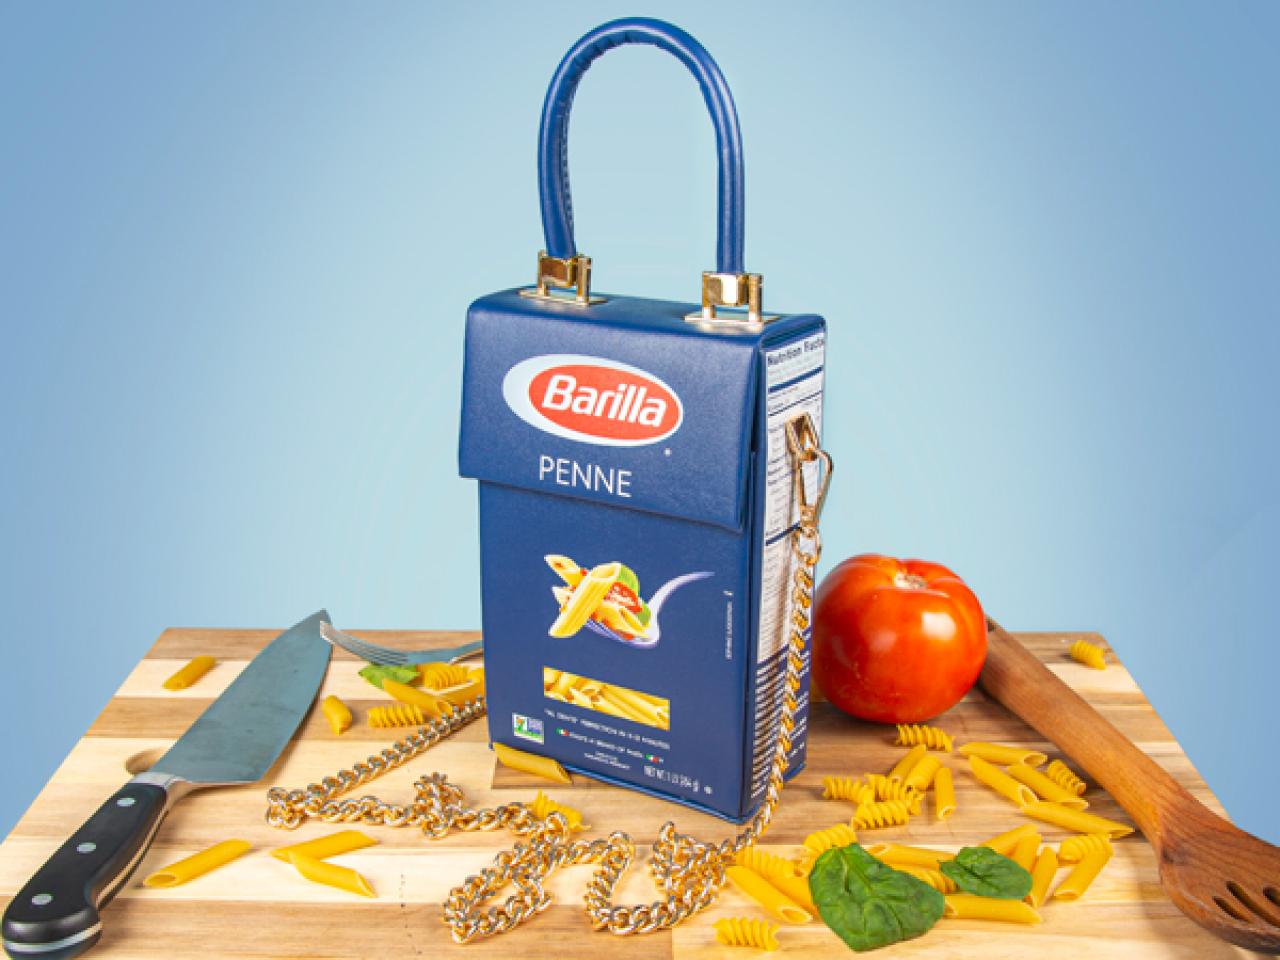 Where to Get the Barilla Network Food Penne | Recipes Pasta Trends, Behind-the-Scenes, Food : Dish and Best Network FN Food - | Purse Box